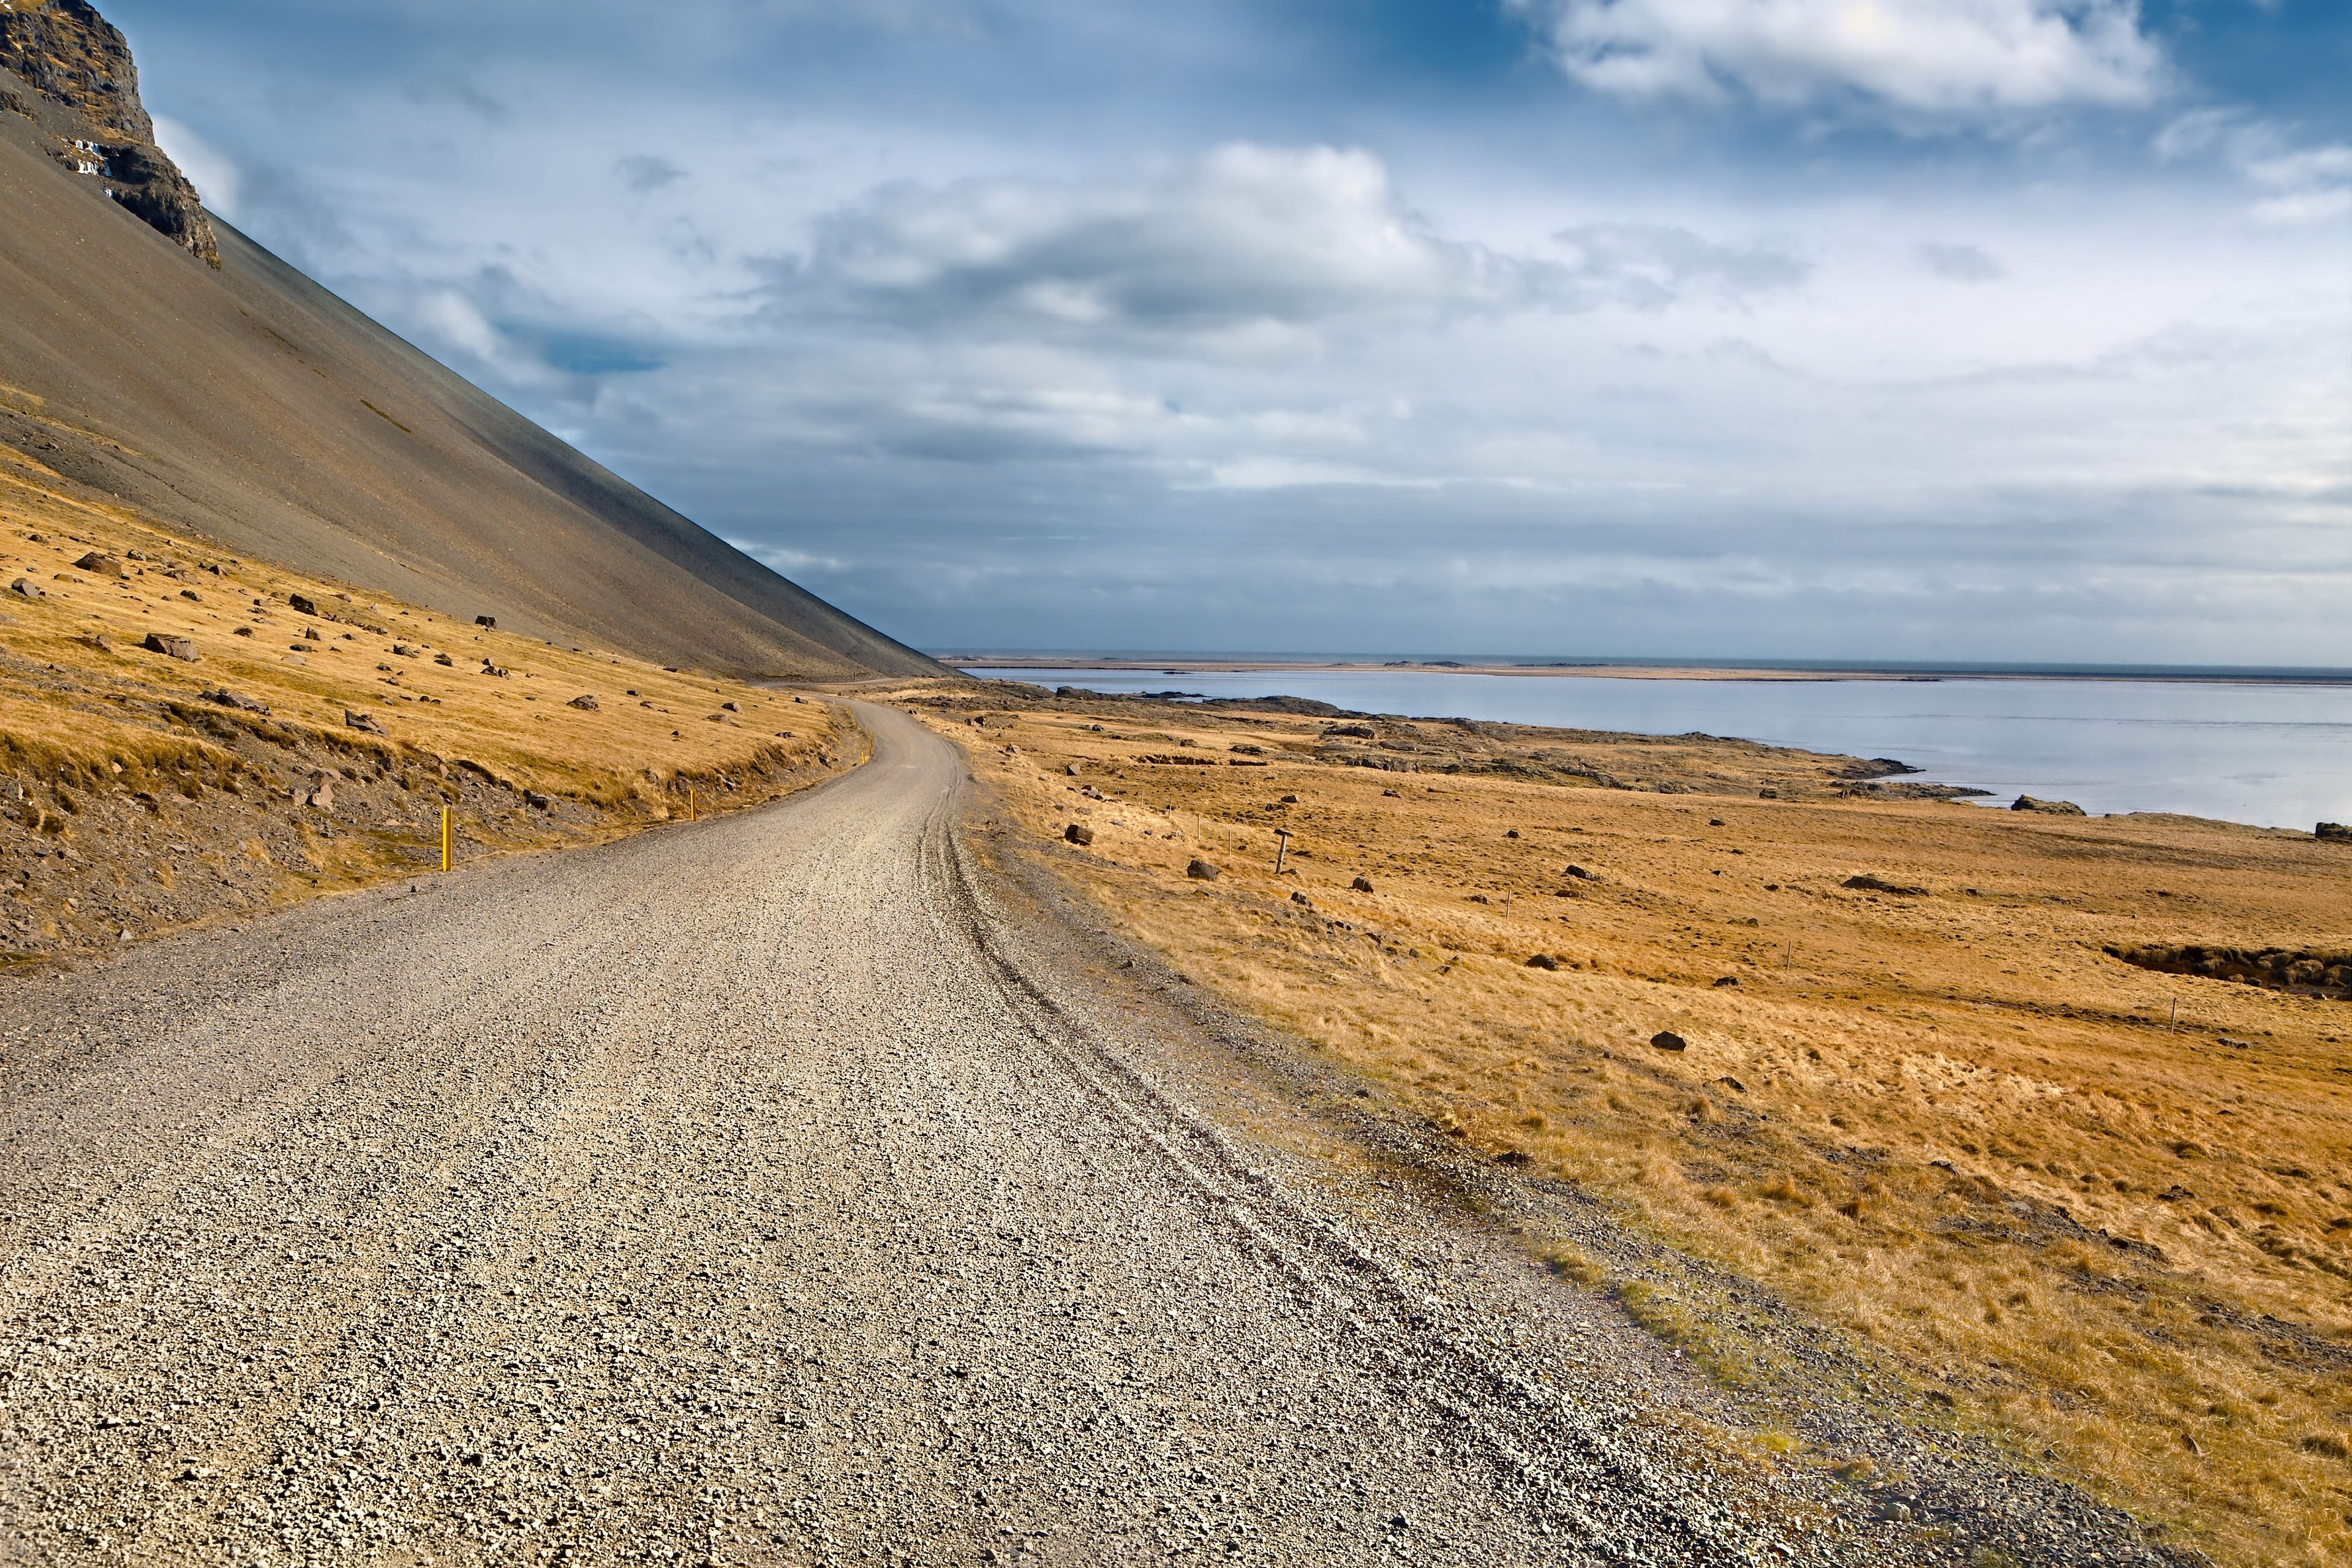 A long, winding gravel road meandering through the stark landscapes of Iceland